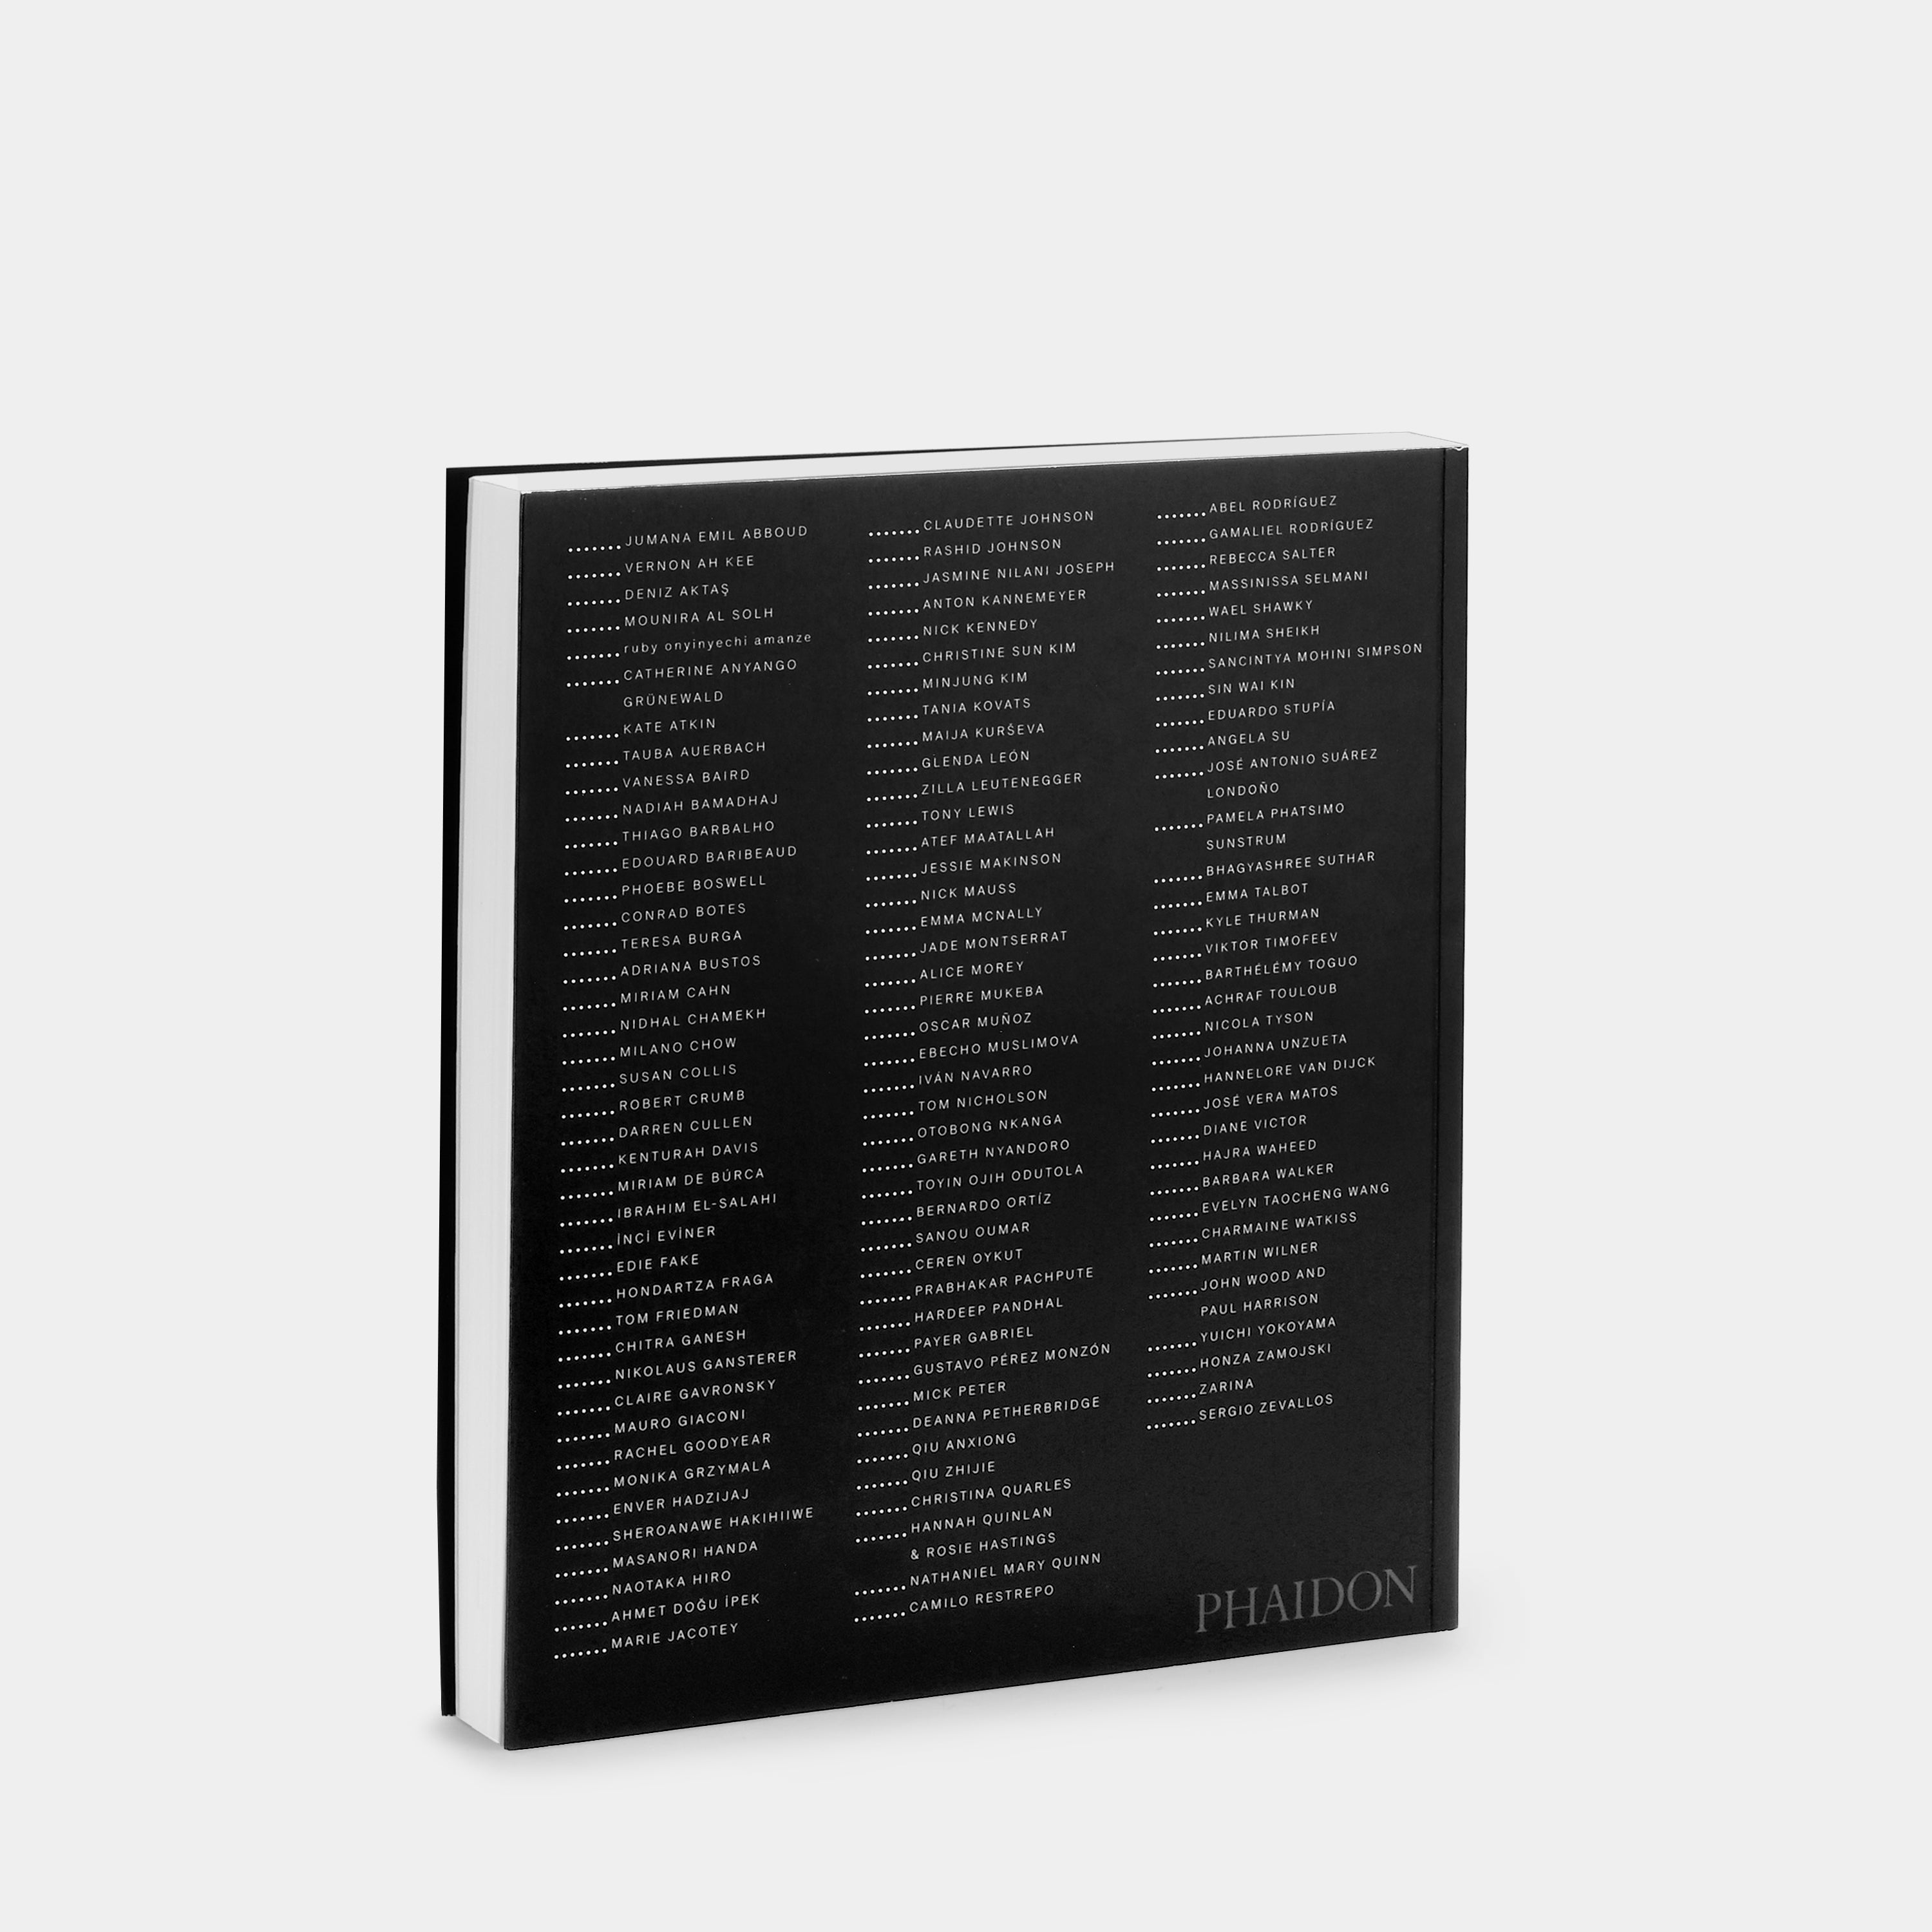 Vitamin D3: Today's Best Contemporary Drawing Phaidon Book